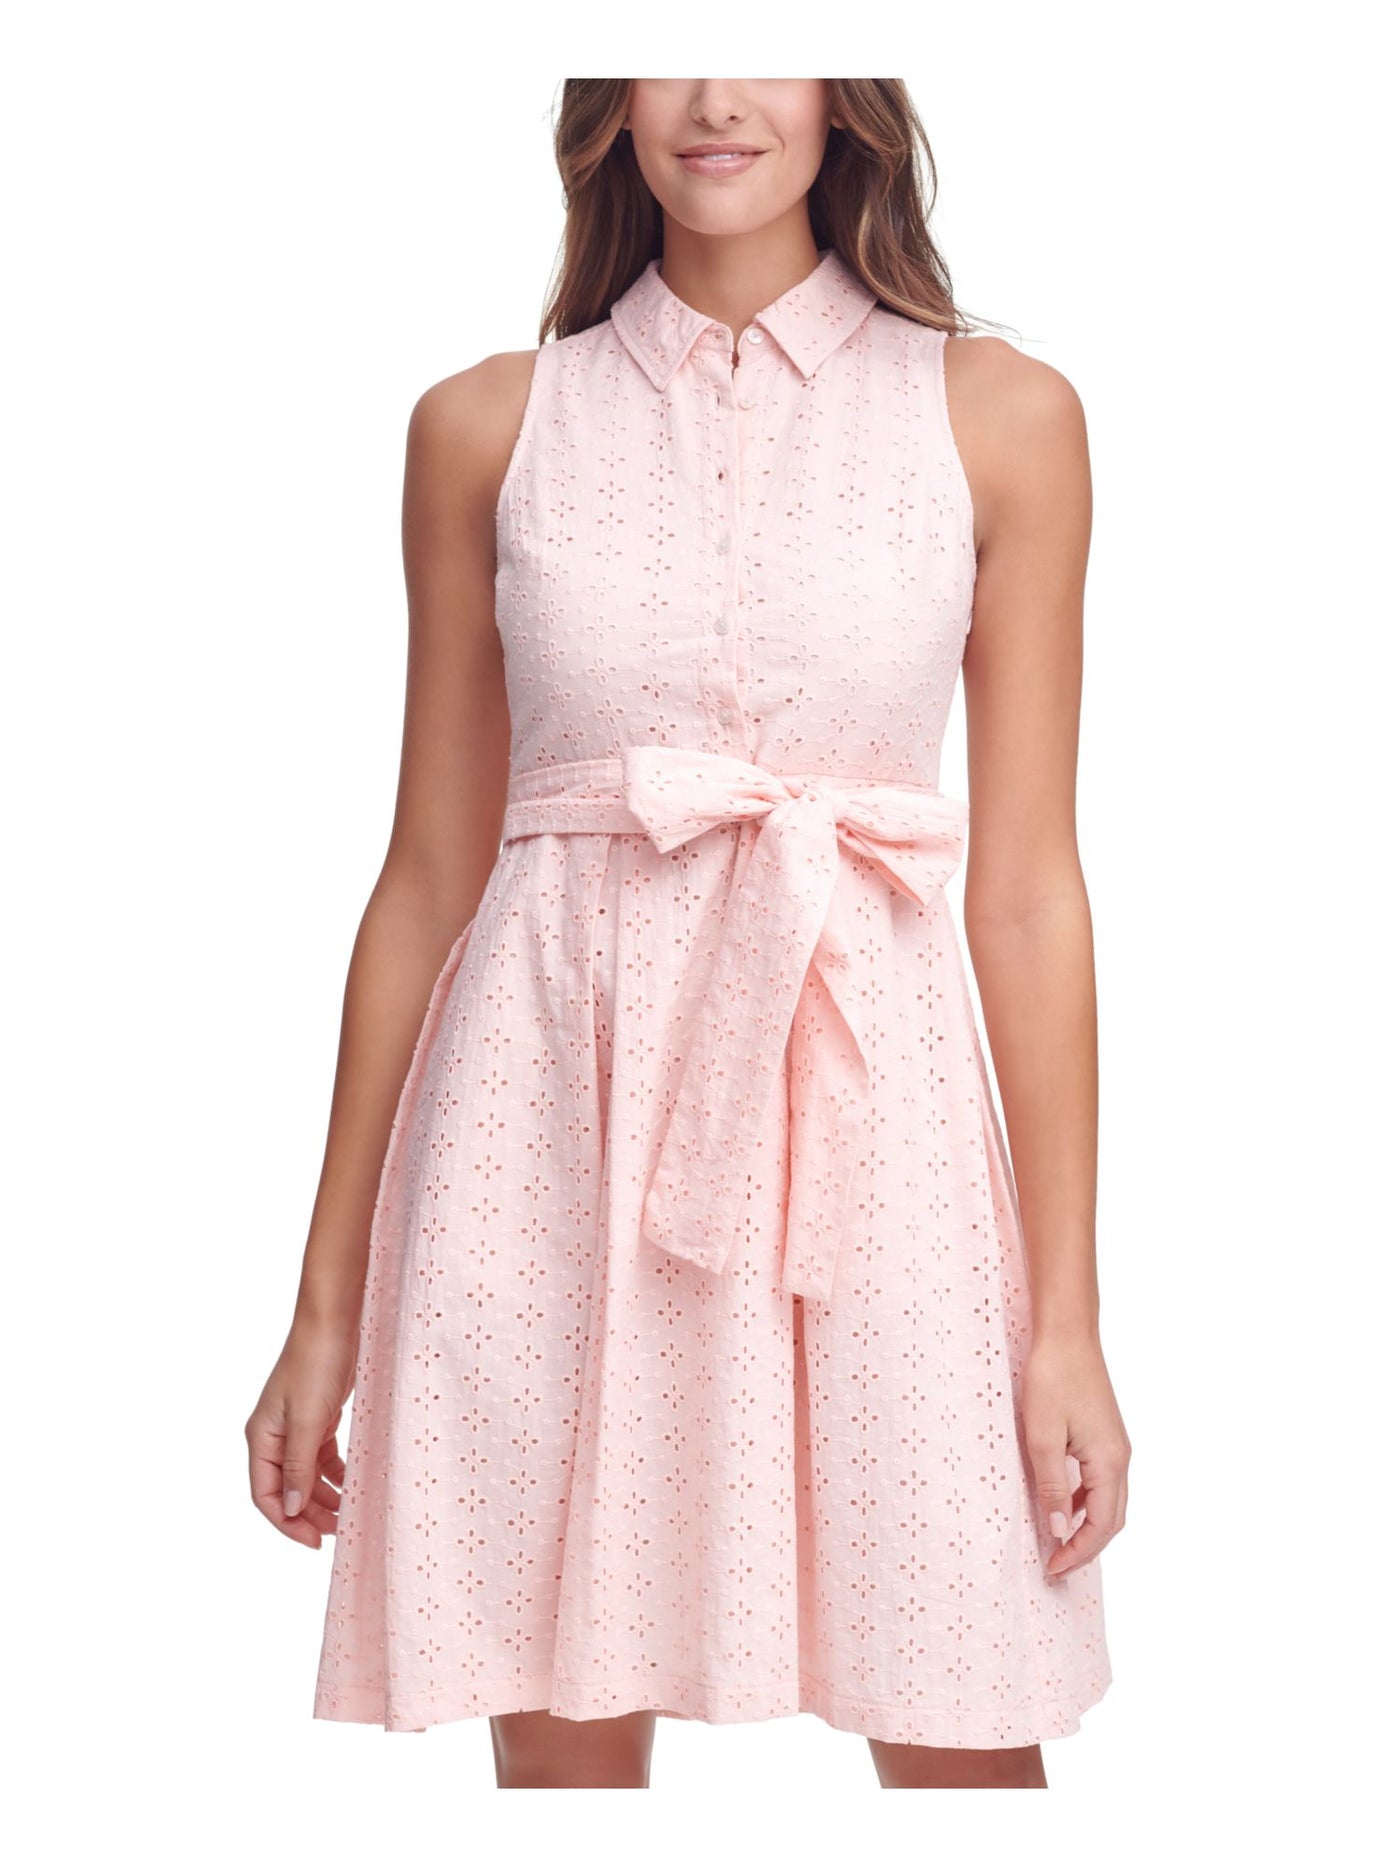 TOMMY HILFIGER Womens Pink Eyelet Zippered Pocketed Belted Buttoned Sleeveless Point Collar Above The Knee Party Shirt Dress Petites 8P